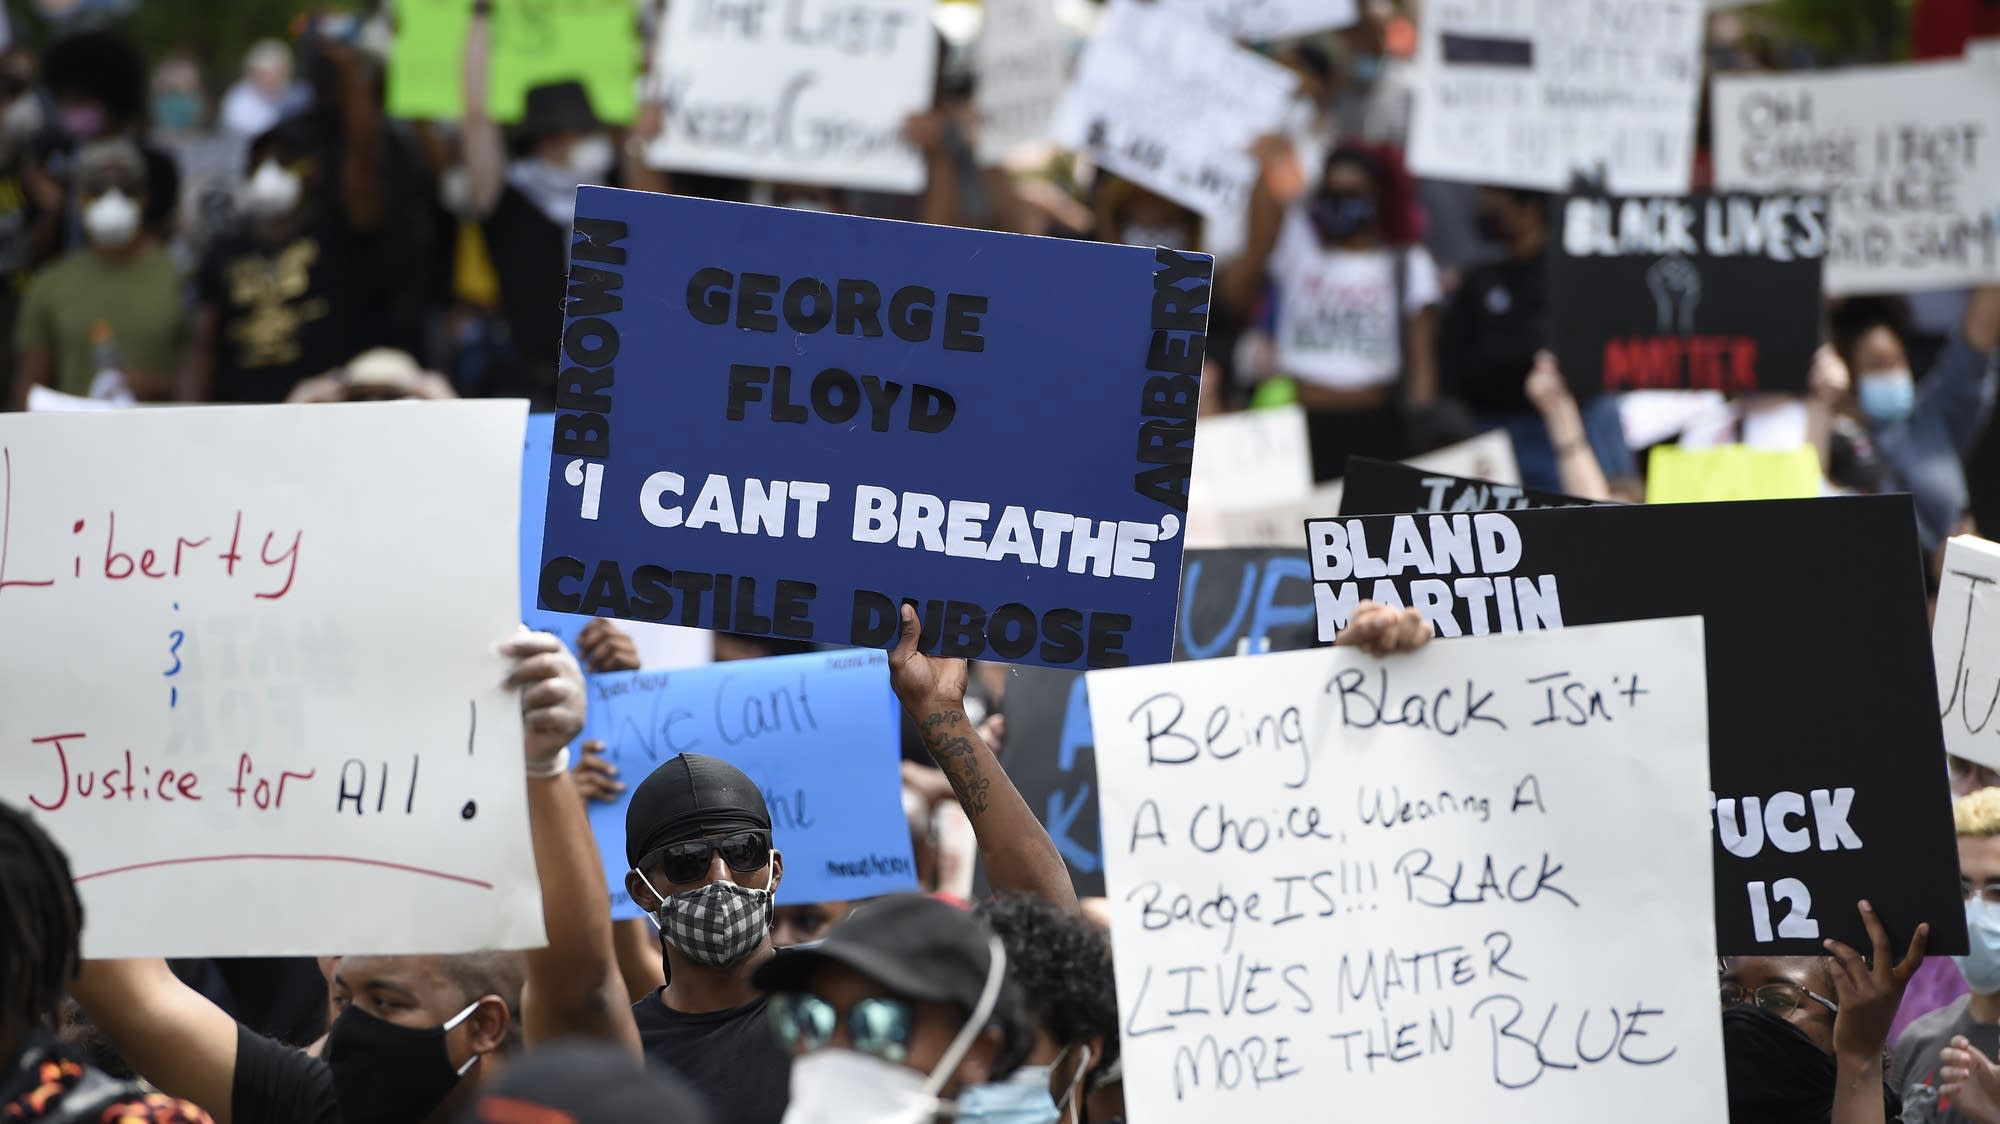 Police Killings & Media Attention - Is There A Bias?